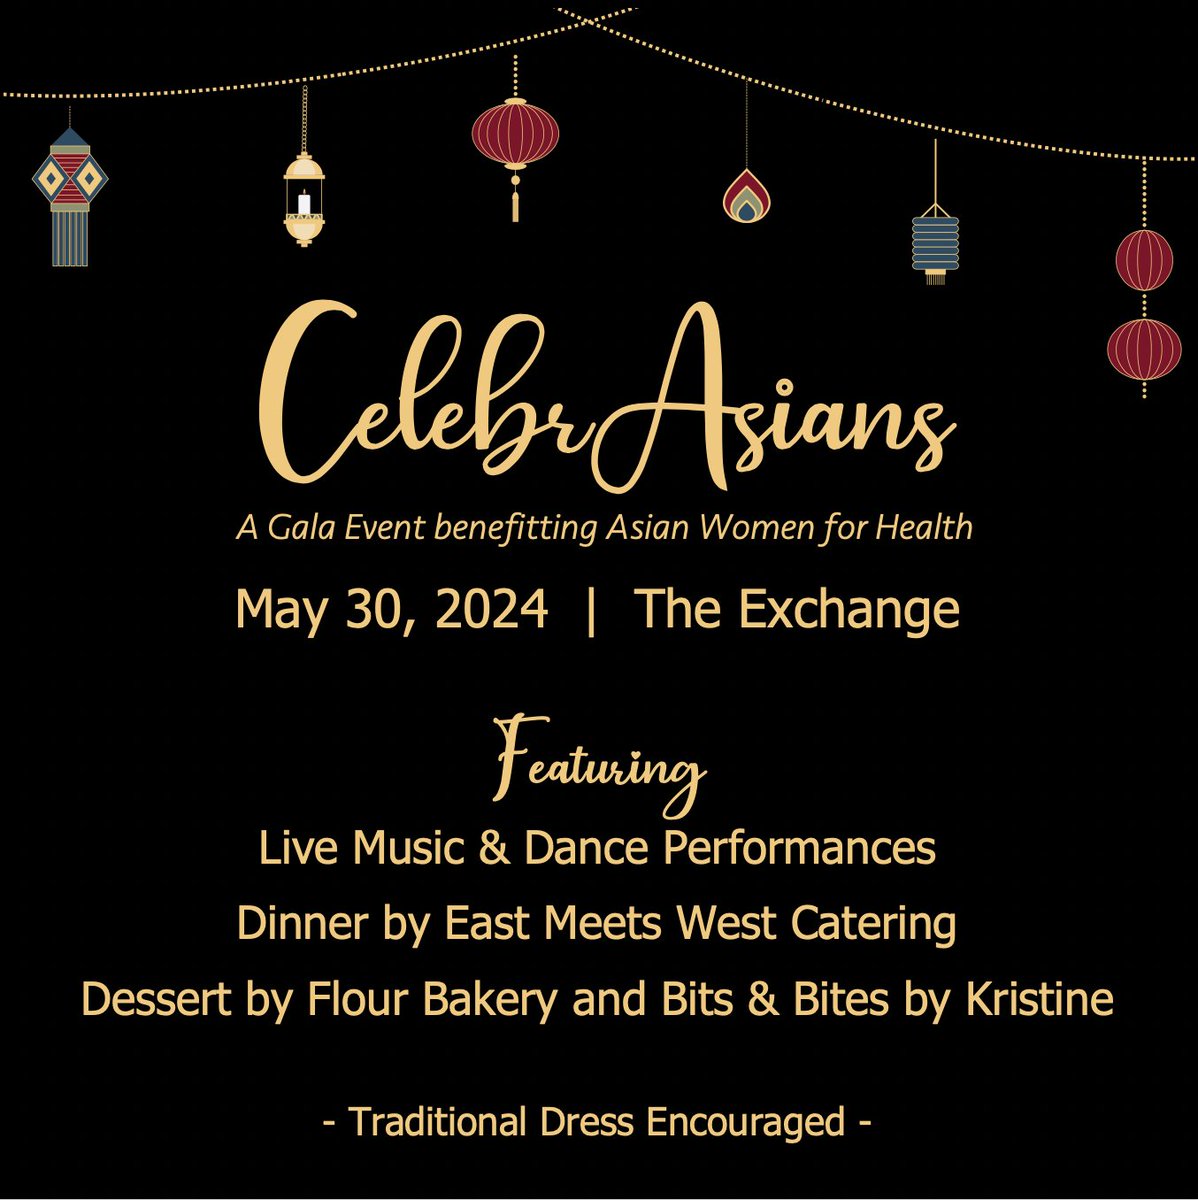 Join me & several other health advocacy leaders and community members at the CelebrAsians Gala, benefitting @AWforHealth, on May 30, for an evening of live performances, food, networking, & inspiration! Tickets and info at CelebrAsians.org.